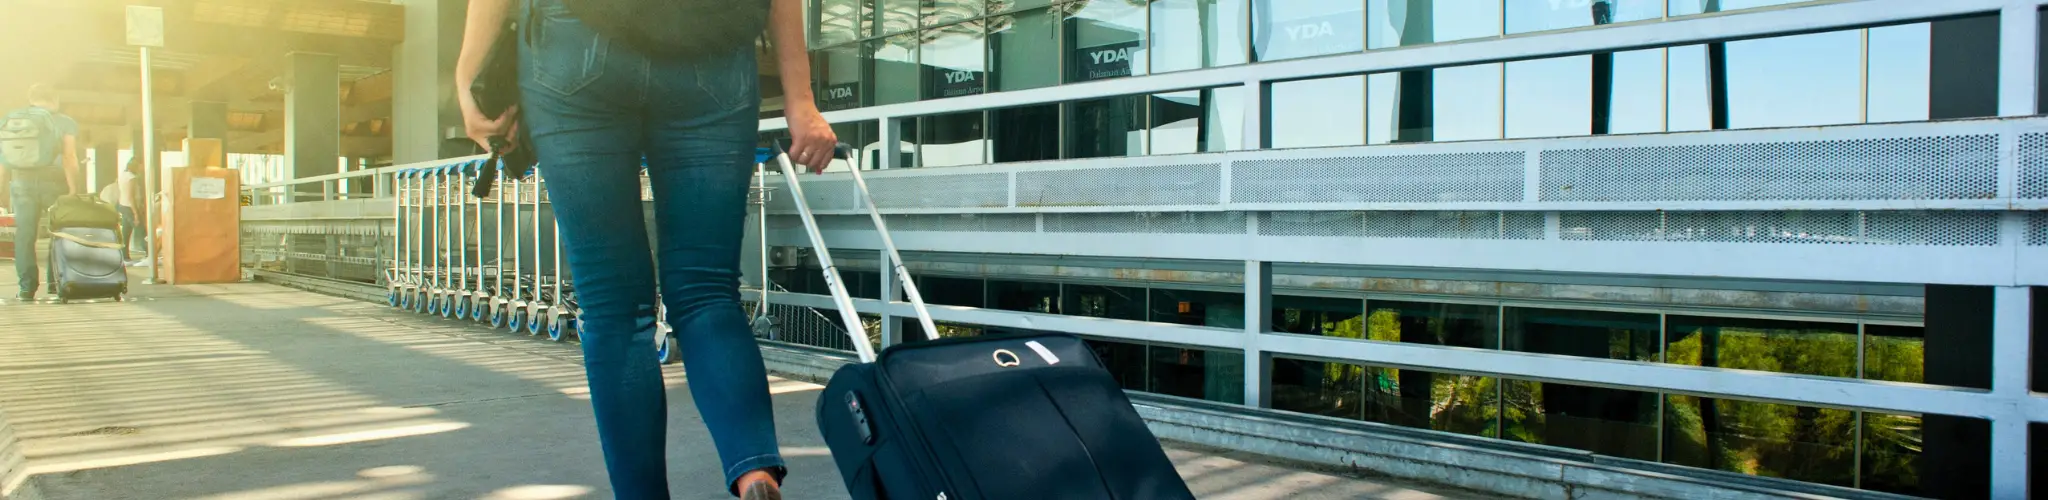 Stock photo of a person with a suitcase walking down a sidewalk by an airport.